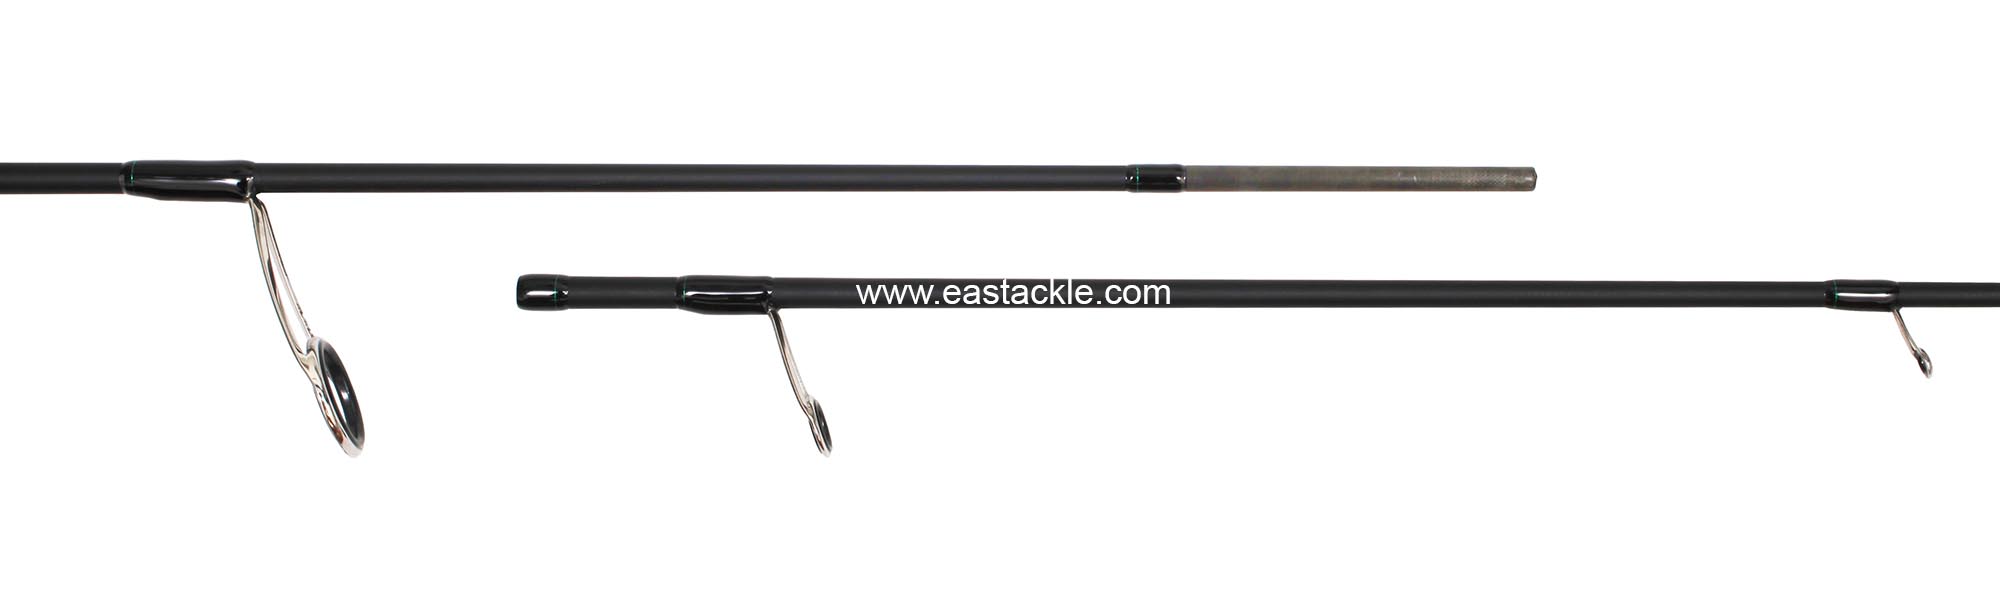 Rapala - Koivu - KVS662MH - Spinning Rod - Joint Section (Side View) | Eastackle